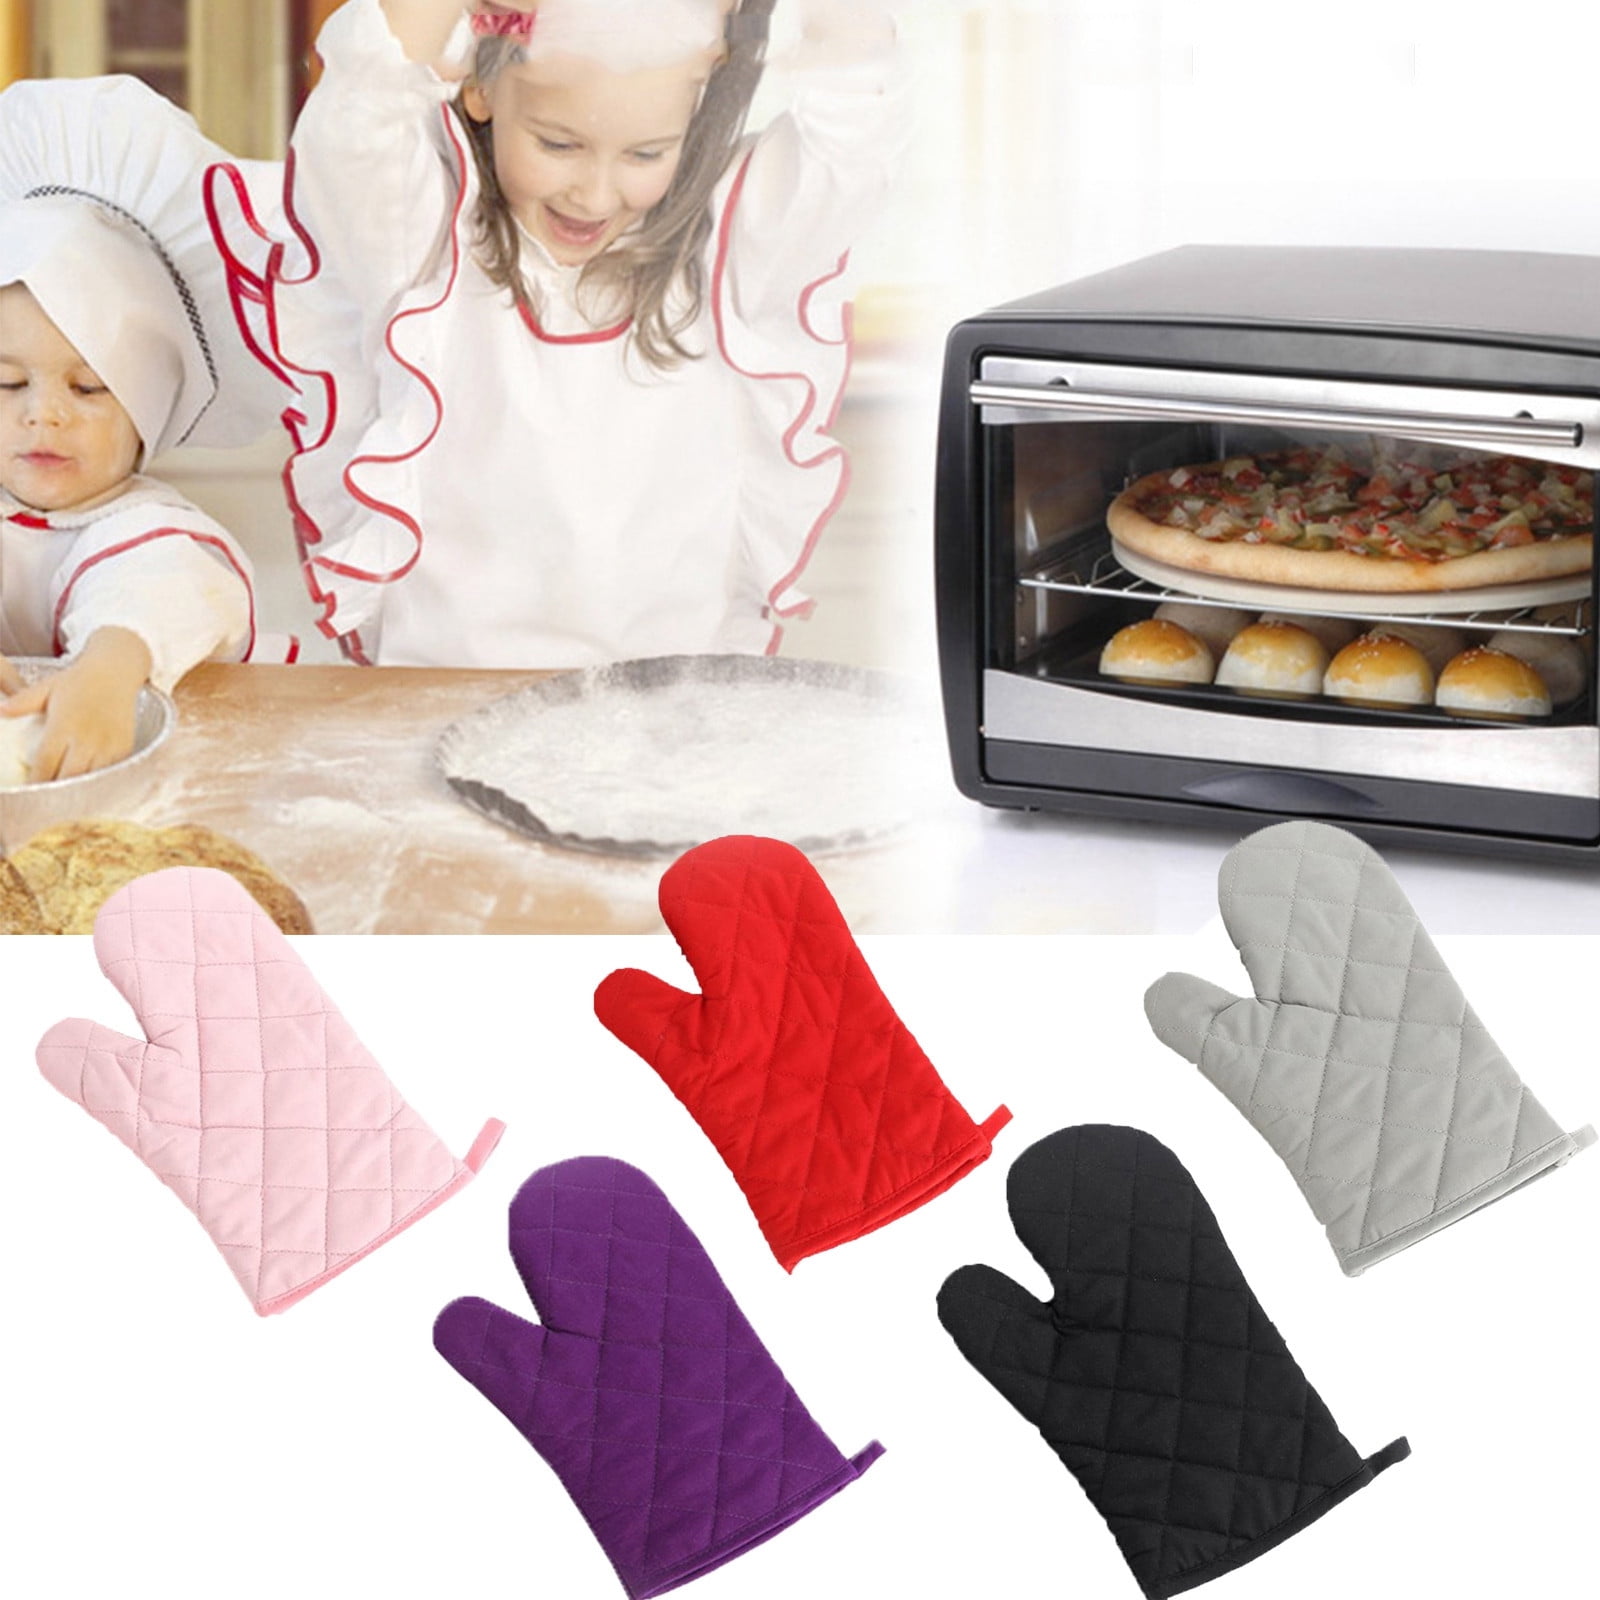 Coziselect Oven Mitts Sets, 500 Degree Heat Heat Resistant Gloves with  Anti-Slip Silicone and Magnetic Hang Design, Suitable for Cooking, Baking